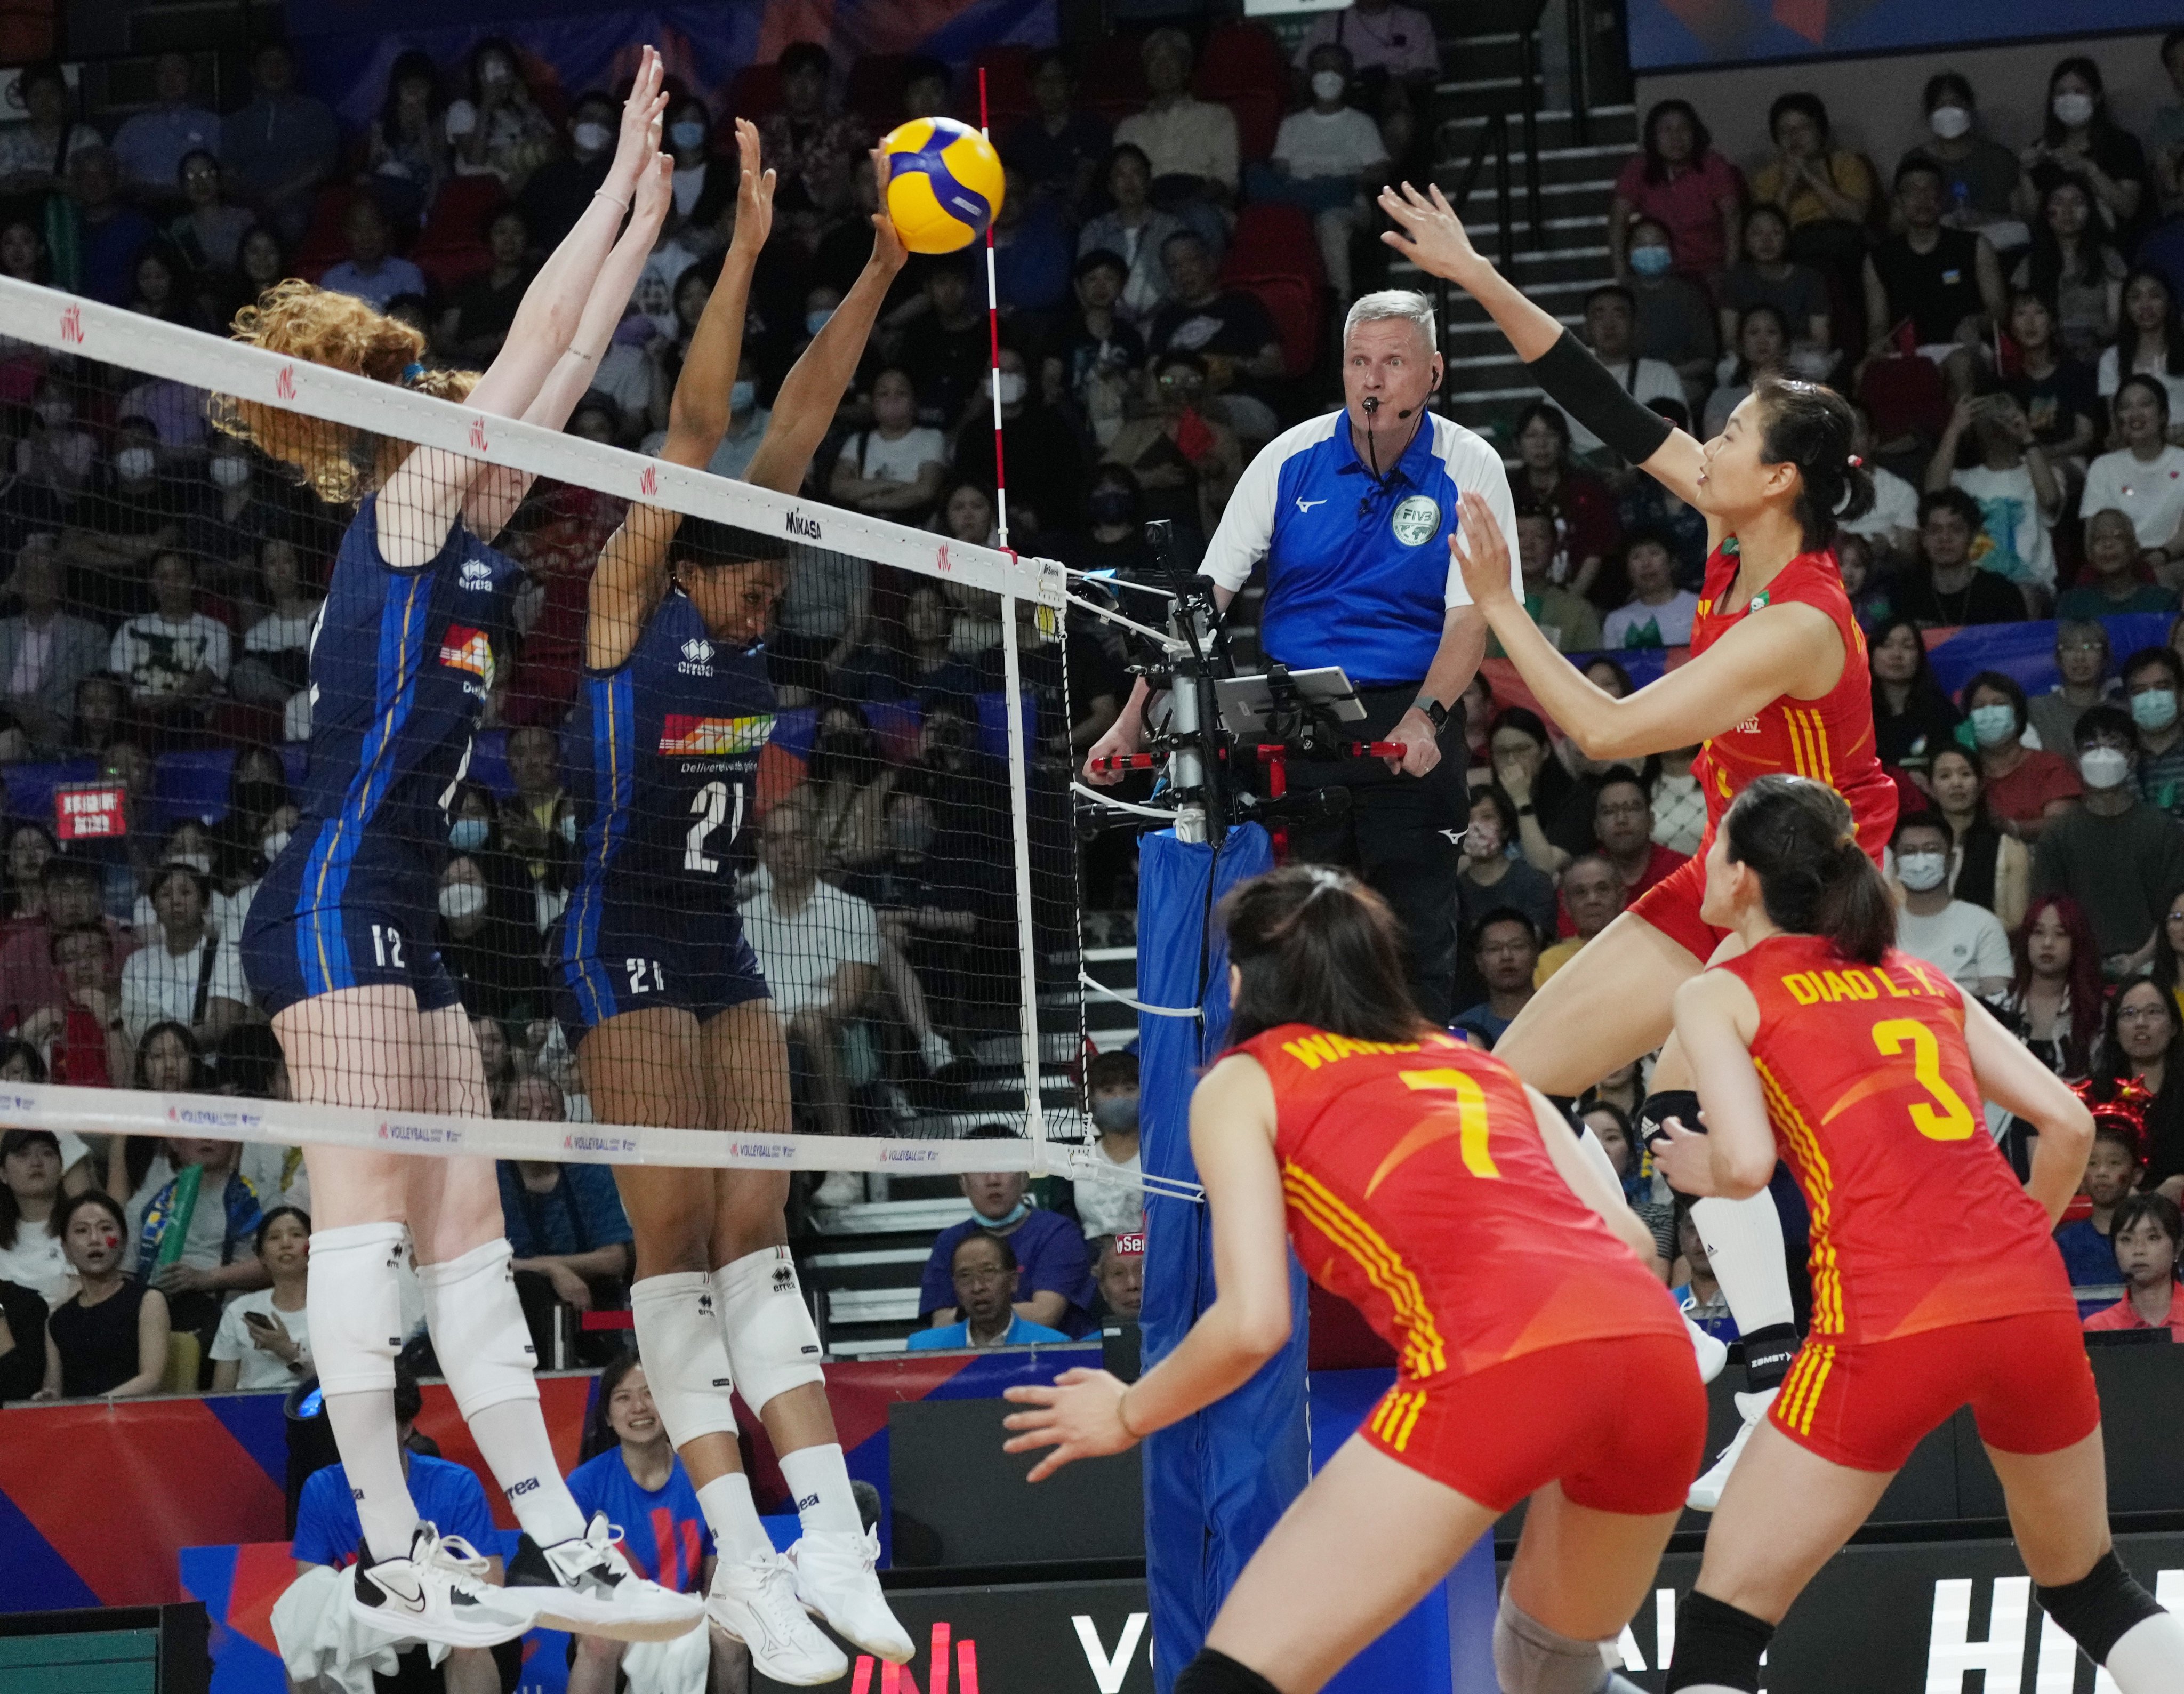 China’s Gong Xiangyu spikes the ball as Italy’s defenders move to block it at the net. Photo: Elson Li